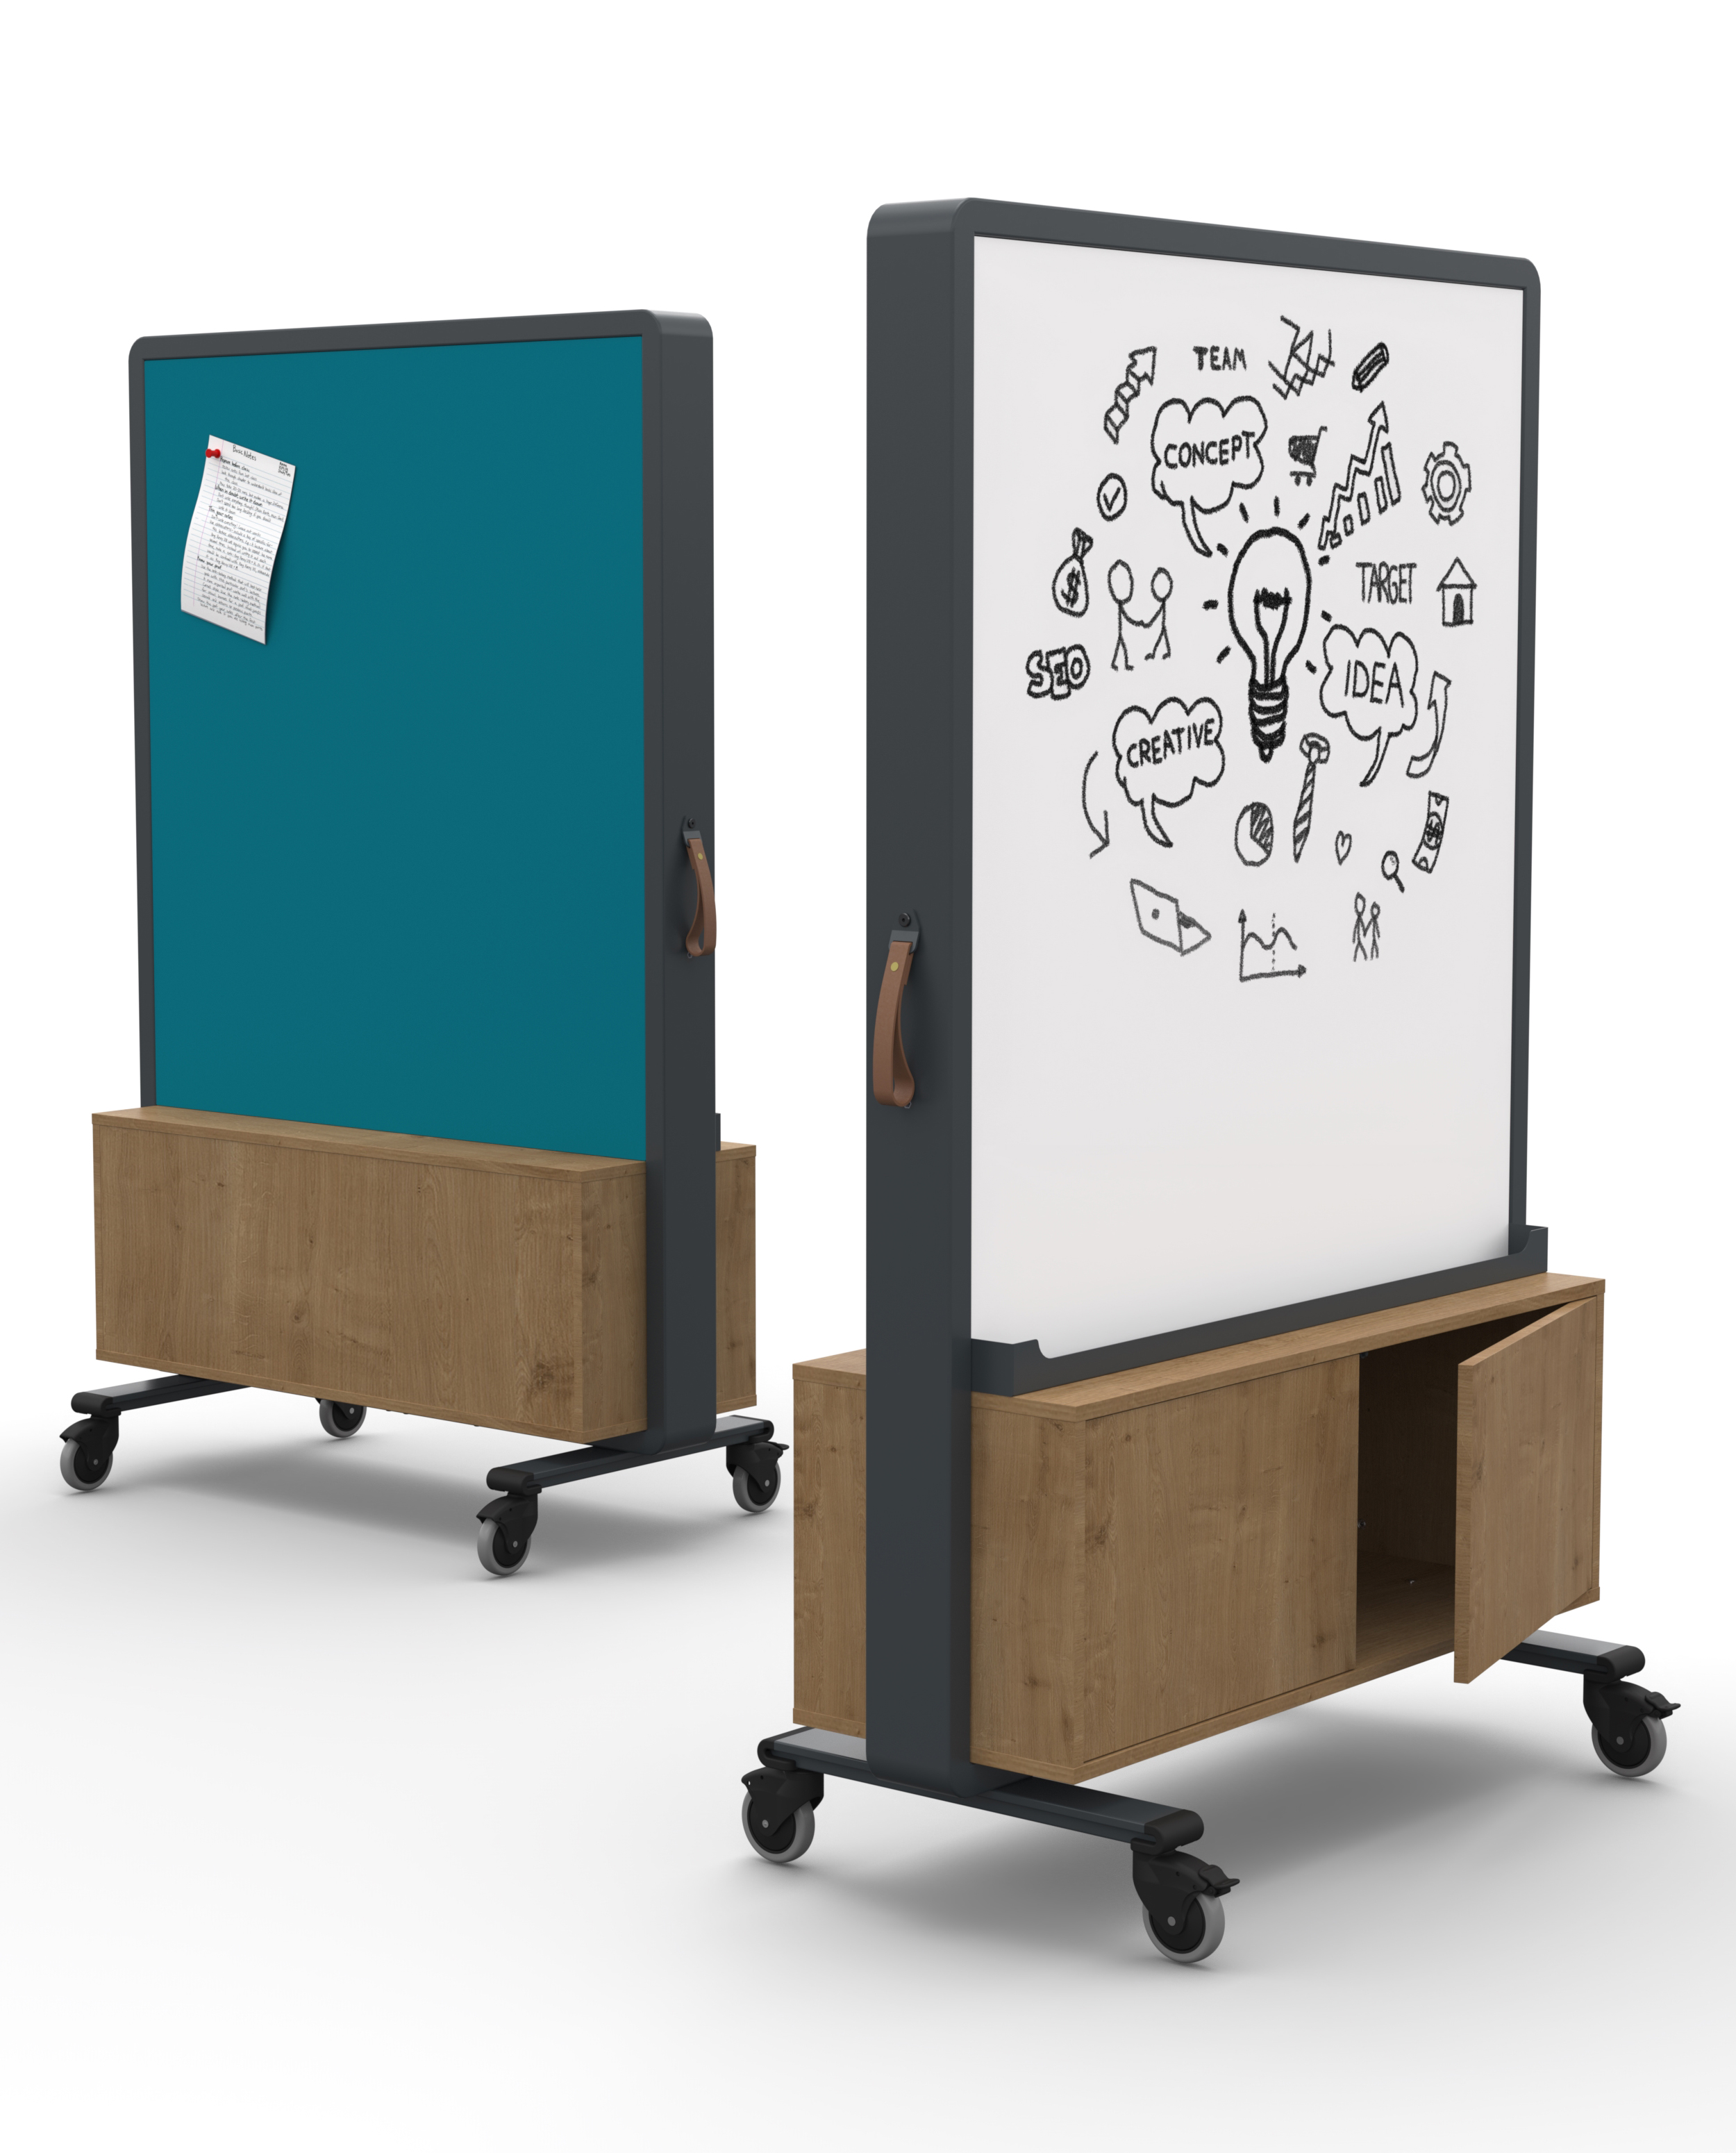 Motion Divider - Whiteboard & Pinnable surface, incl MFC storage at bottom